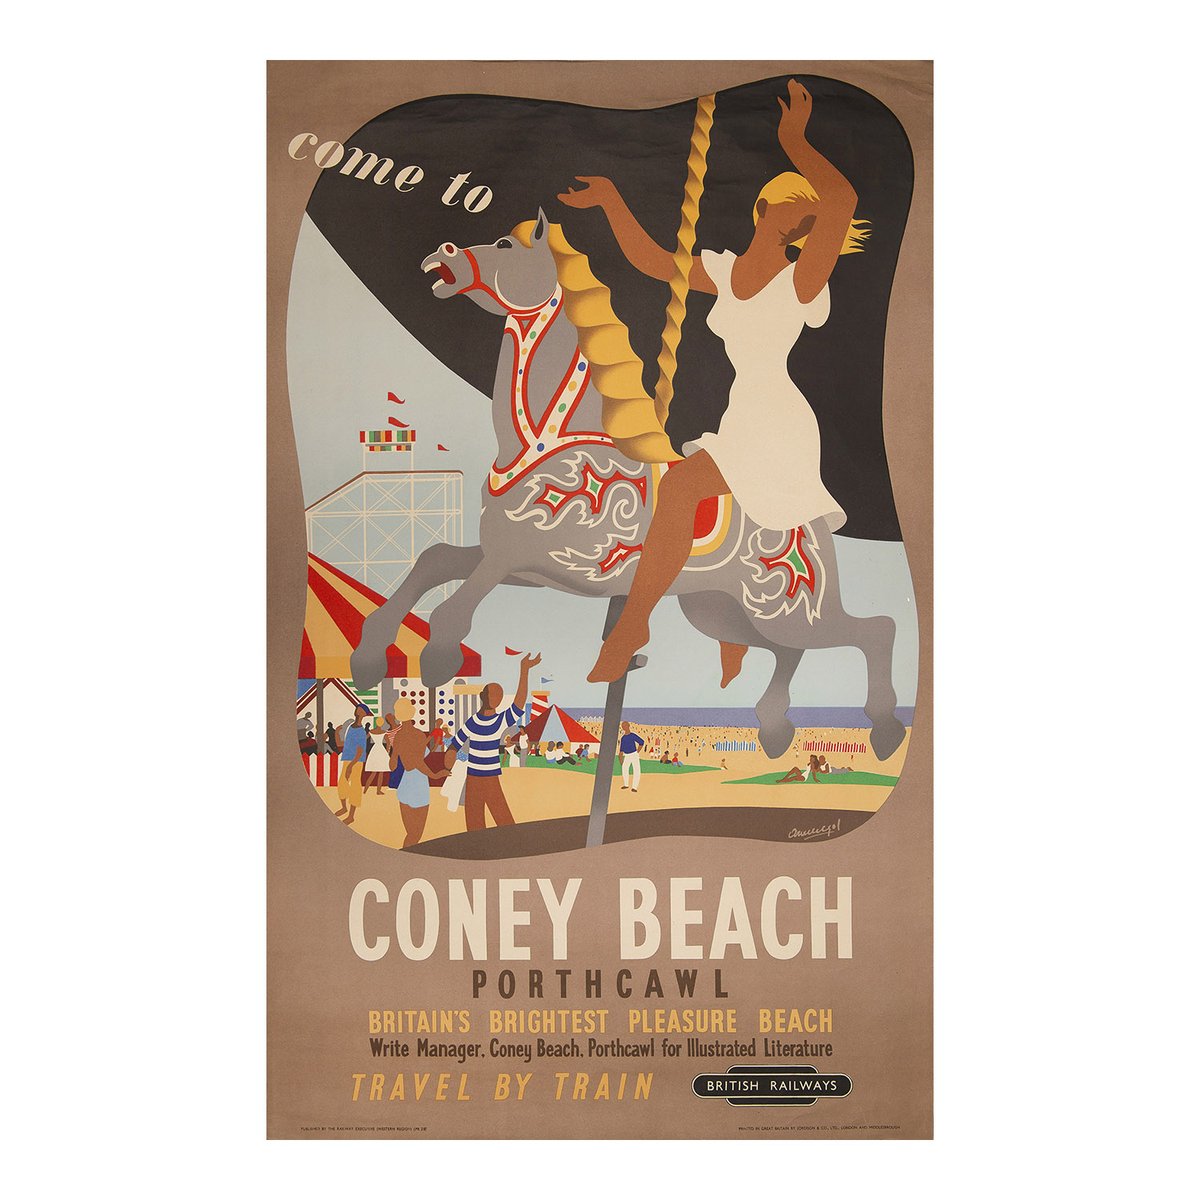 This, in my humble opinion, is the best railway poster I've currently got for sale. Not the most expensive, but what fluidity and appeal. Printed for the Railway Executive to promote Coney Beach in Porthcawl & painted by the Spanish artist-designer Mario Hubert Armengol, 1952